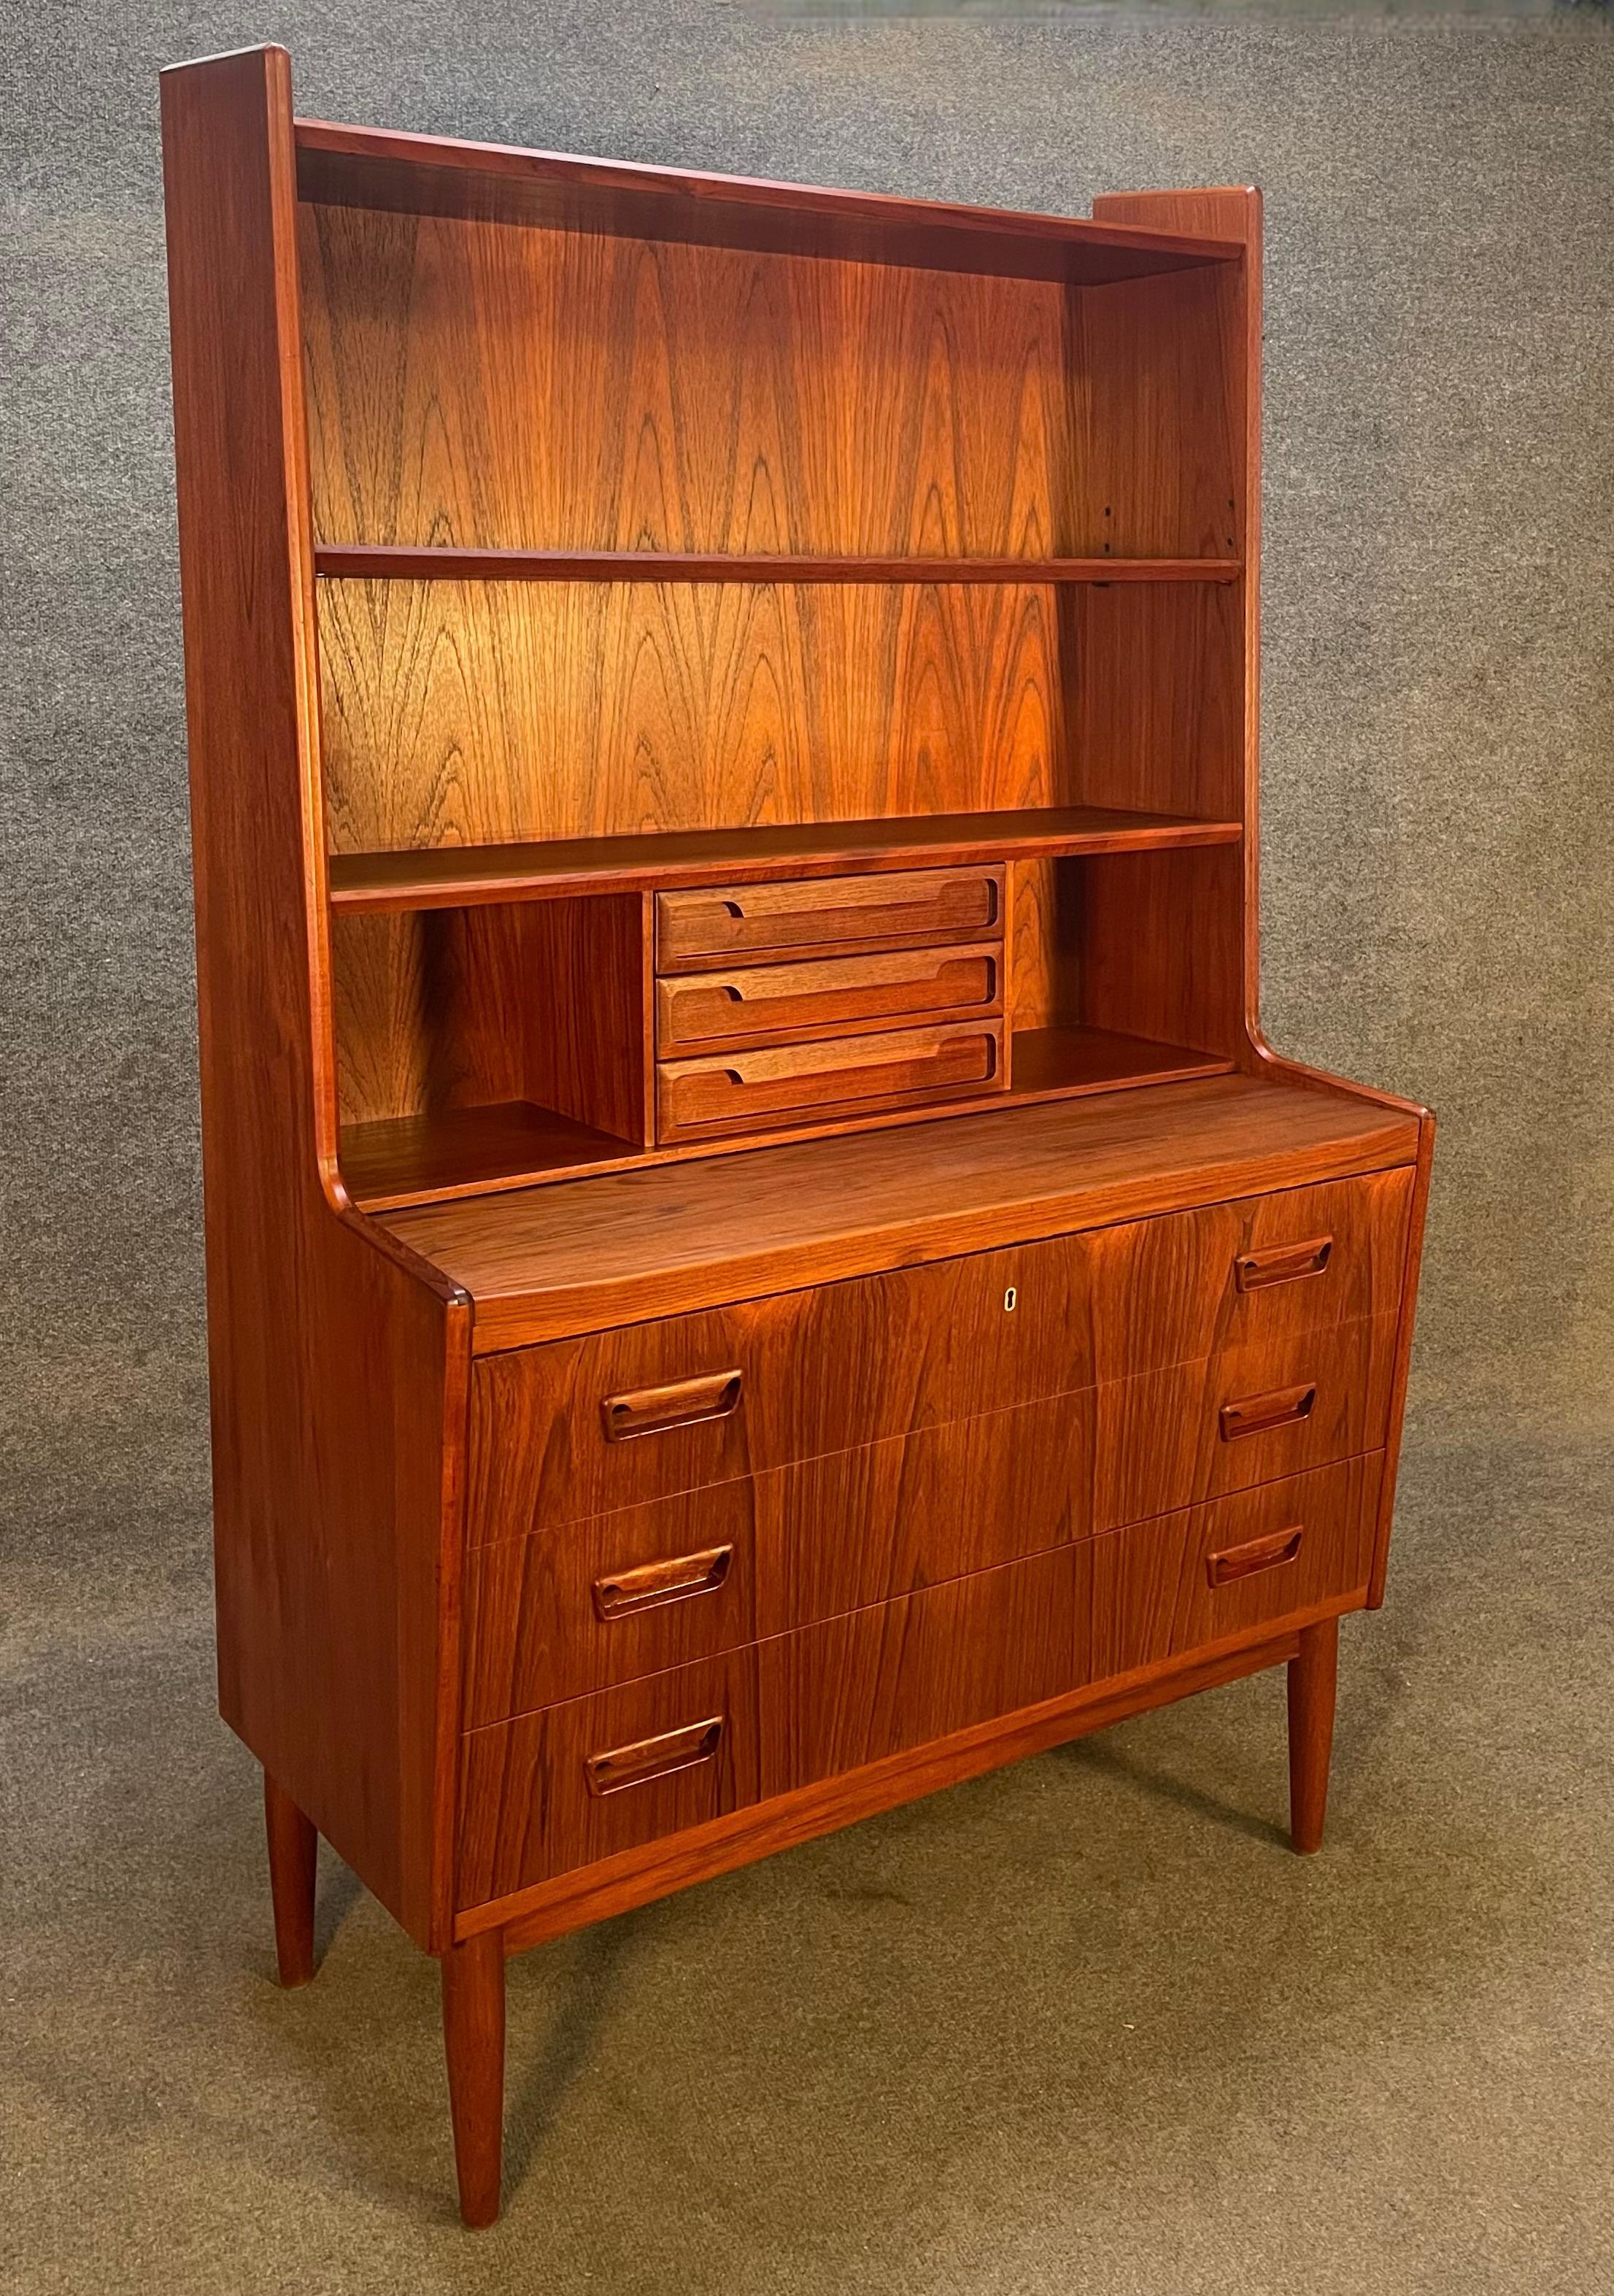 Here is a beautiful 1960's scandinavian modern secretary desk bookcase in teak wood recently imported from Europe to California before its refinishing.
This exquisite piece features a vibrant wood grain, two adjustable shelves, a central bank of